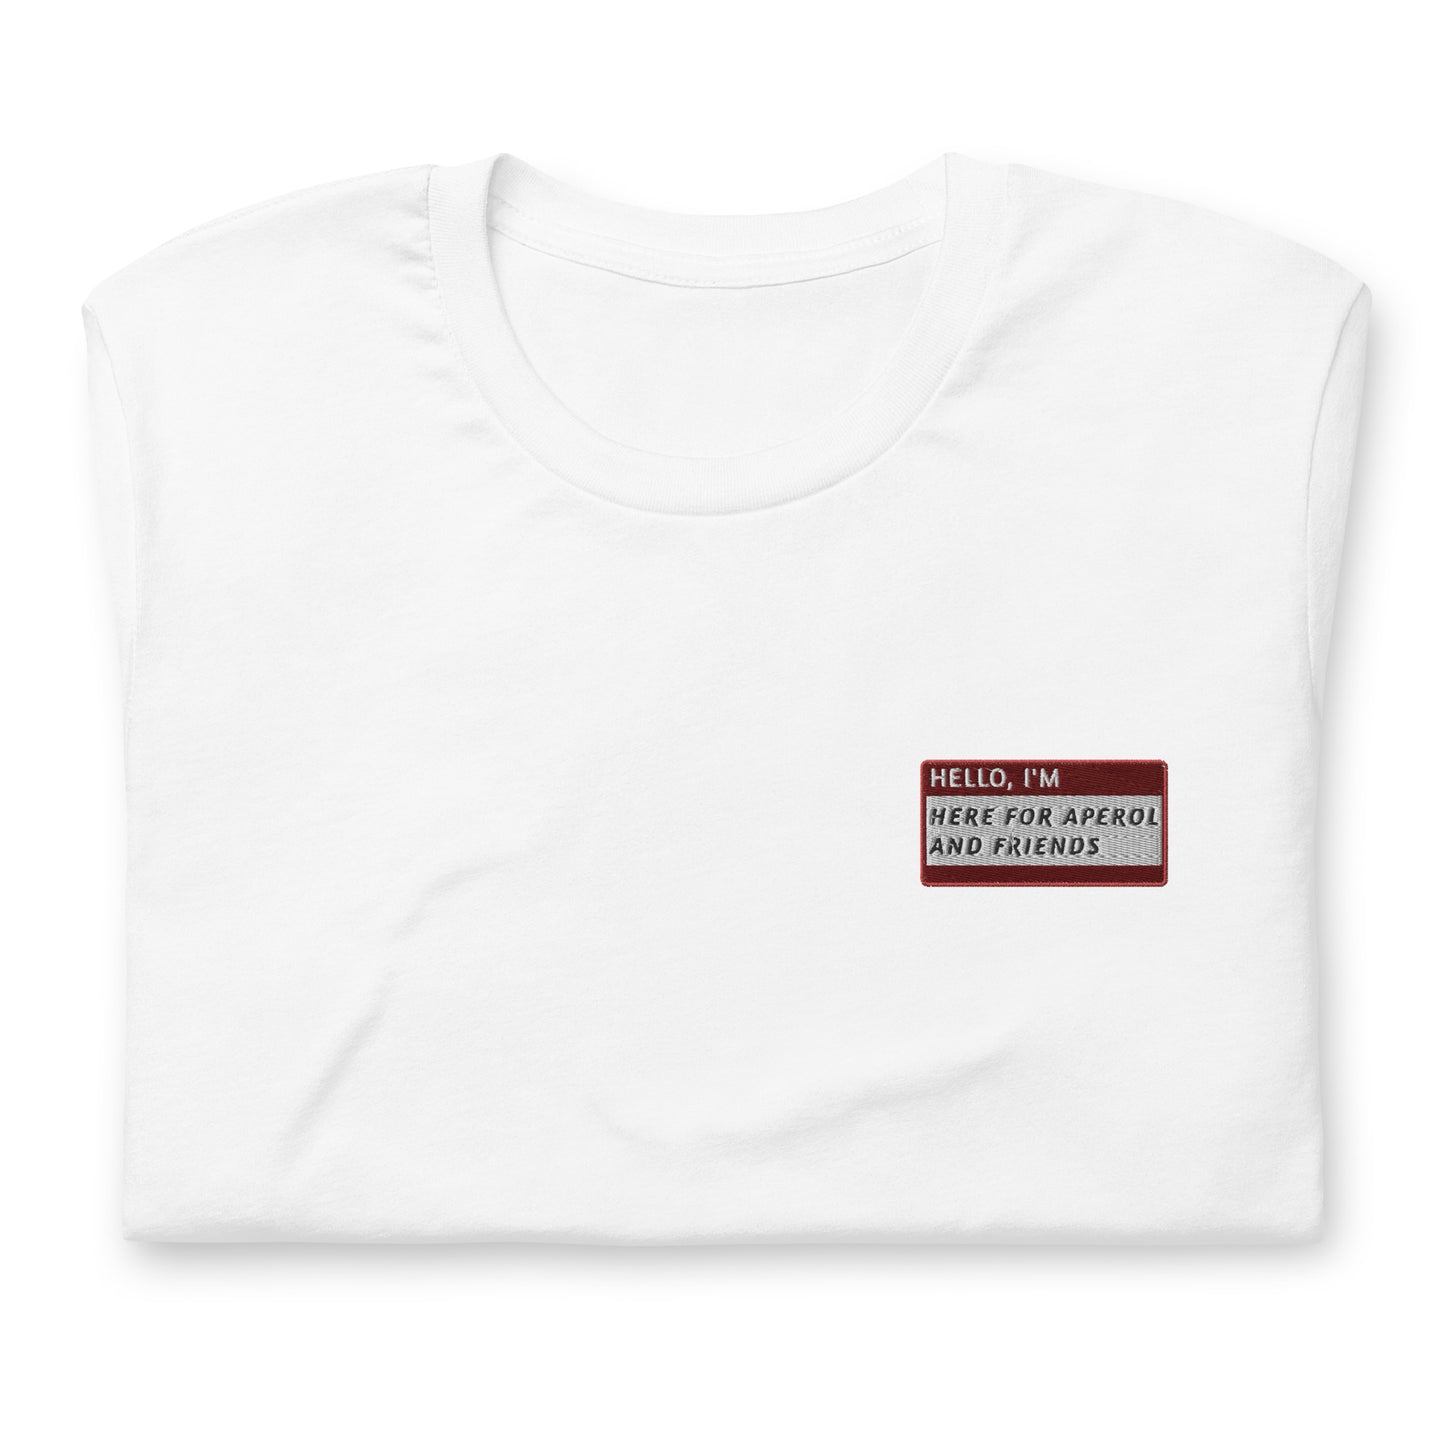 HELLO I'M HERE FOR APEROL AND FRIENDS - Name Tag T-Shirt